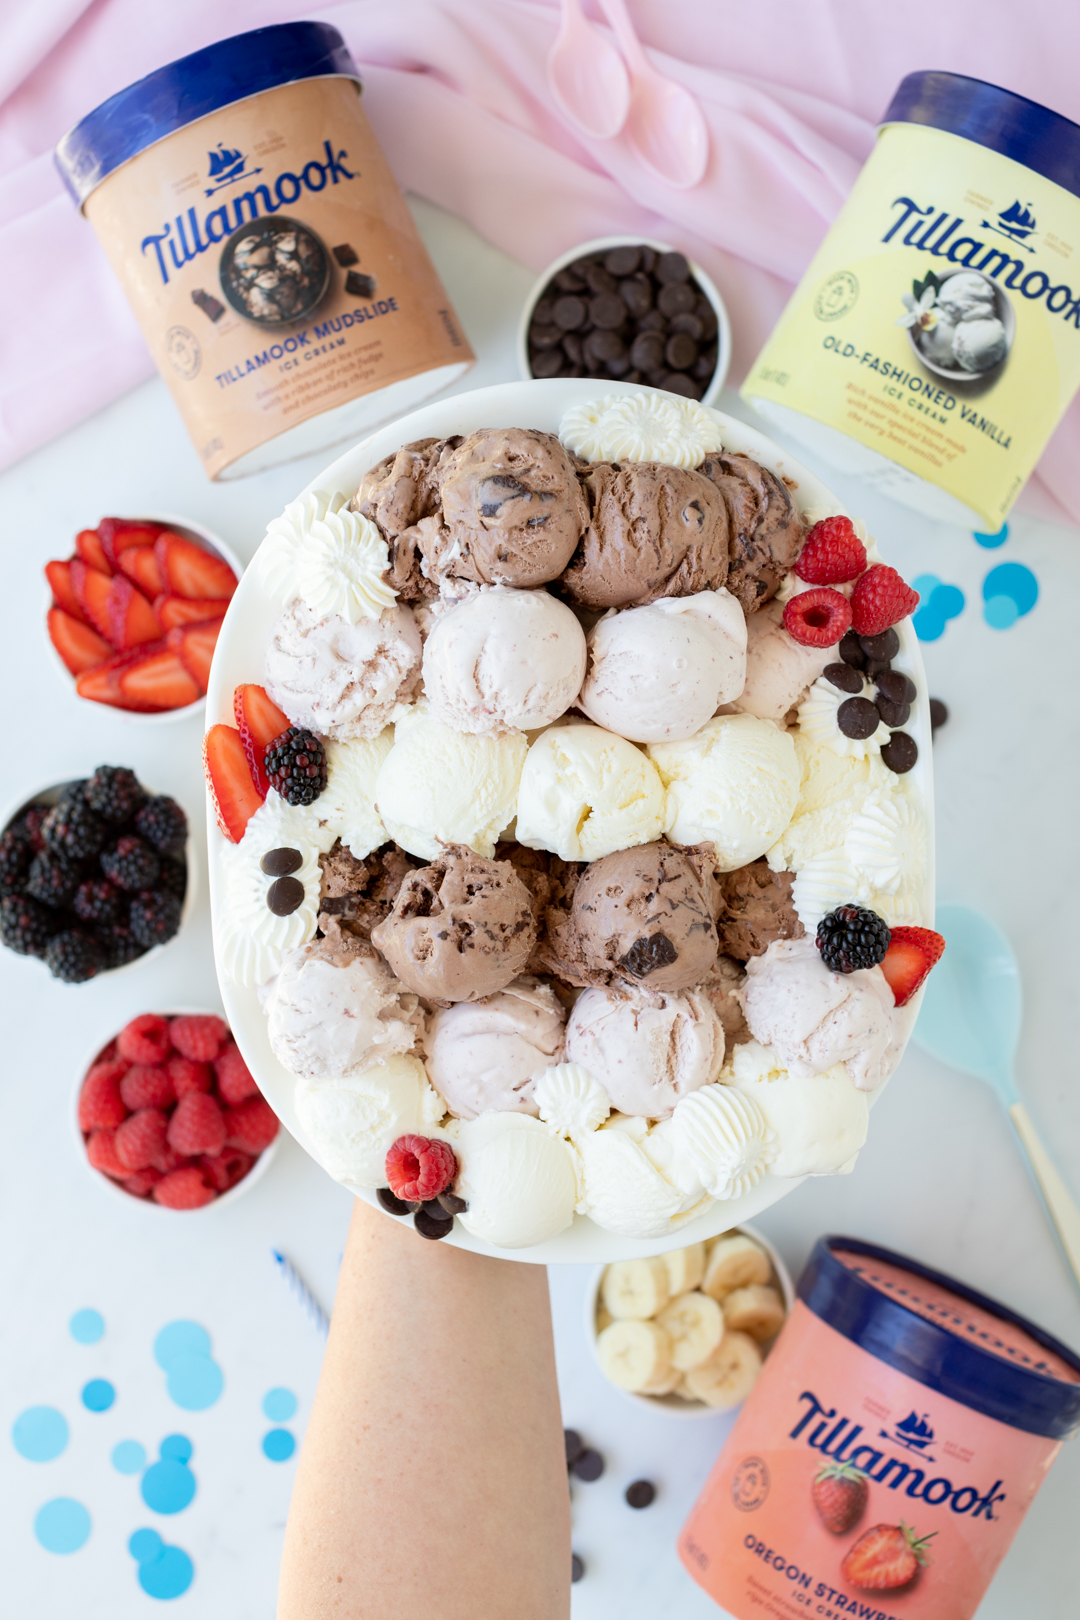 serve an ice cream scoop party platter with fruit on top